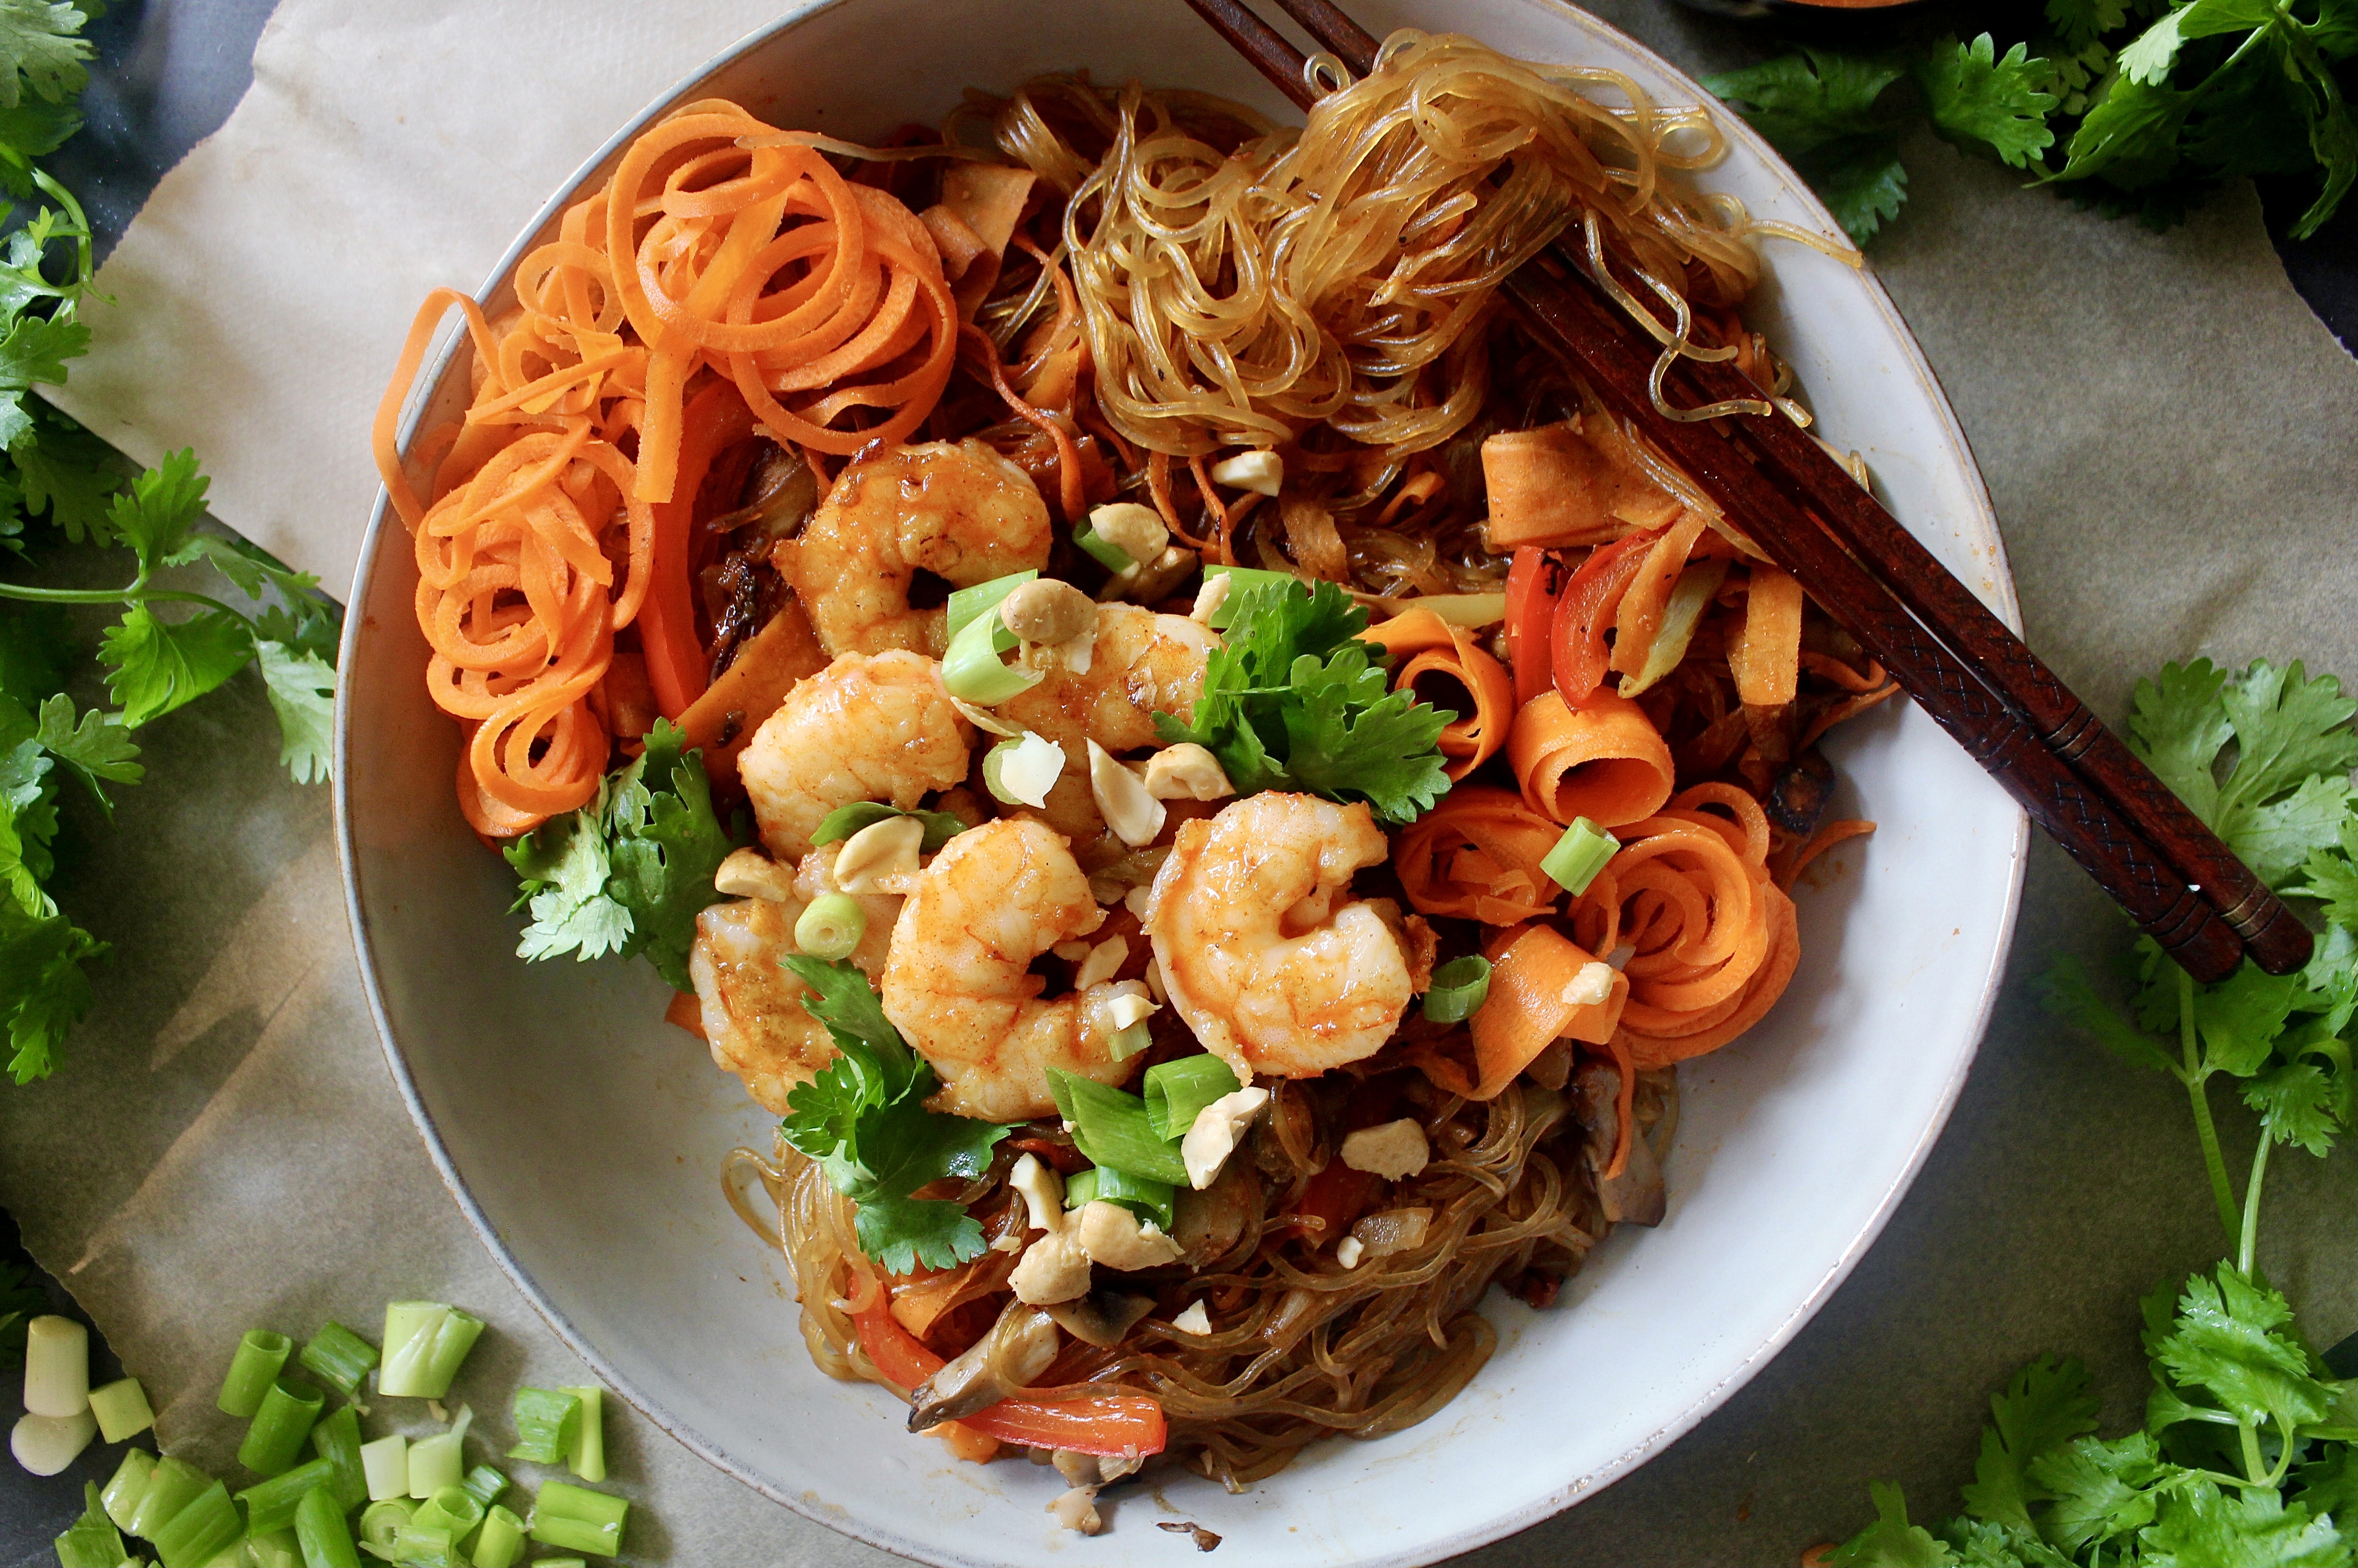 Wok seared shrimp tossed in saucy glass noodles with all the veggies: this Korean Glass Noodle Shrimp Stir Fry is the best easy weeknight dinner!